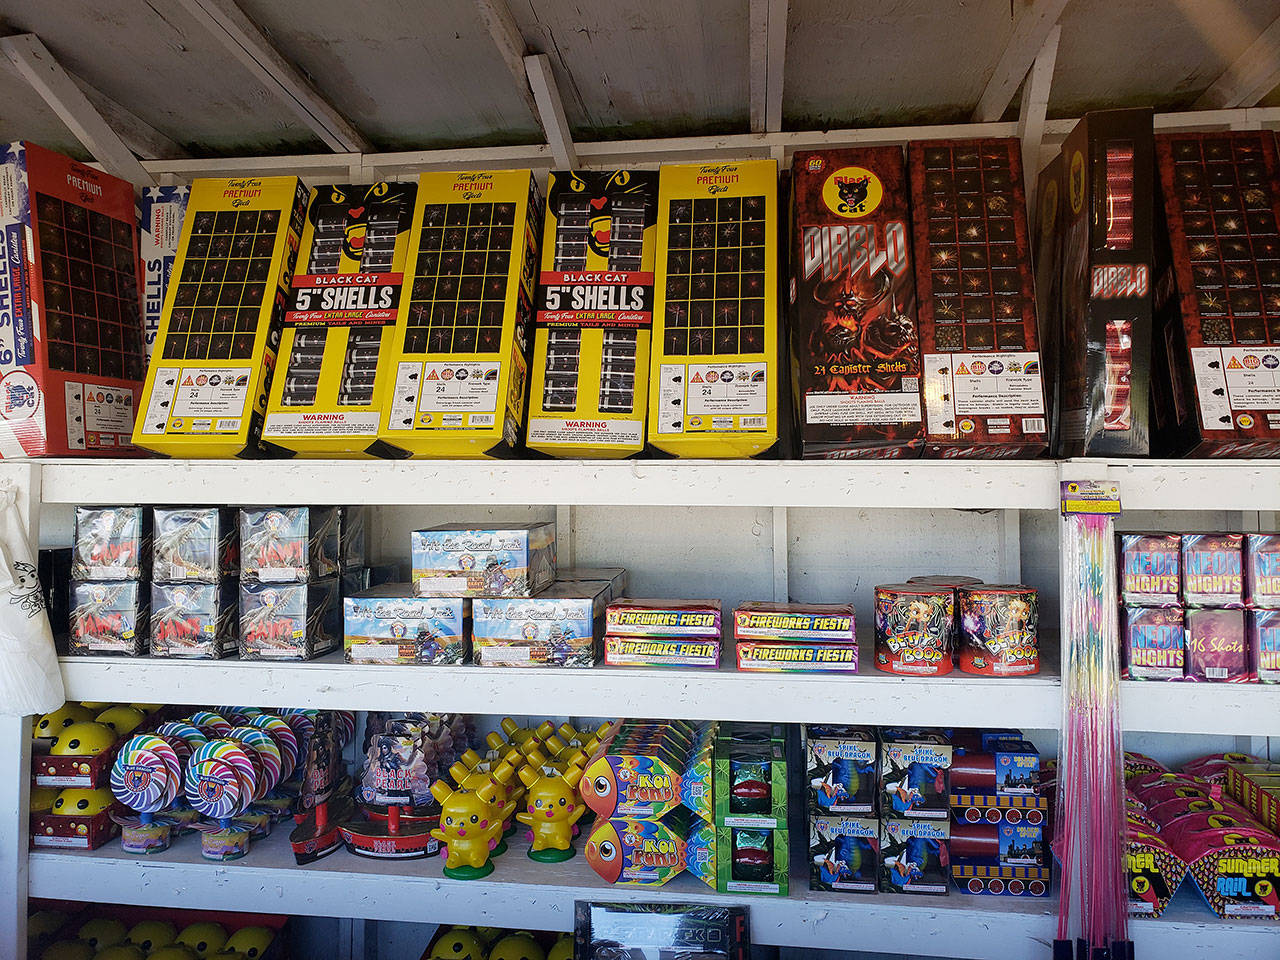 A selection of fireworks on display.